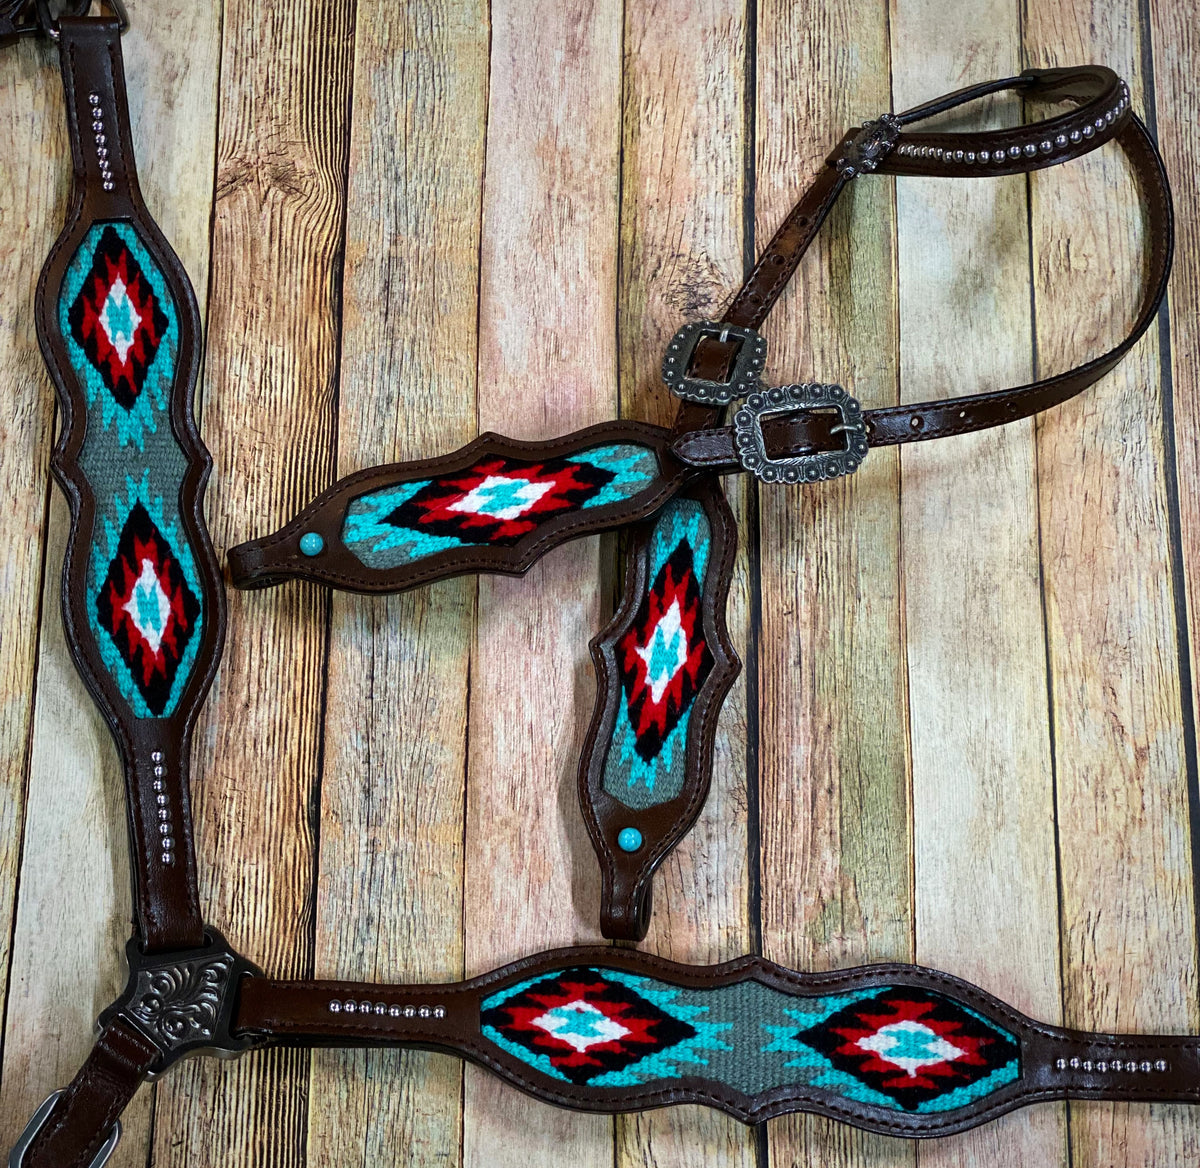 The turquoise condensed Pendleton wool rope can is so stunning, it's a 4 rope  can with matching tooled leather and Pendleton wool inlay…